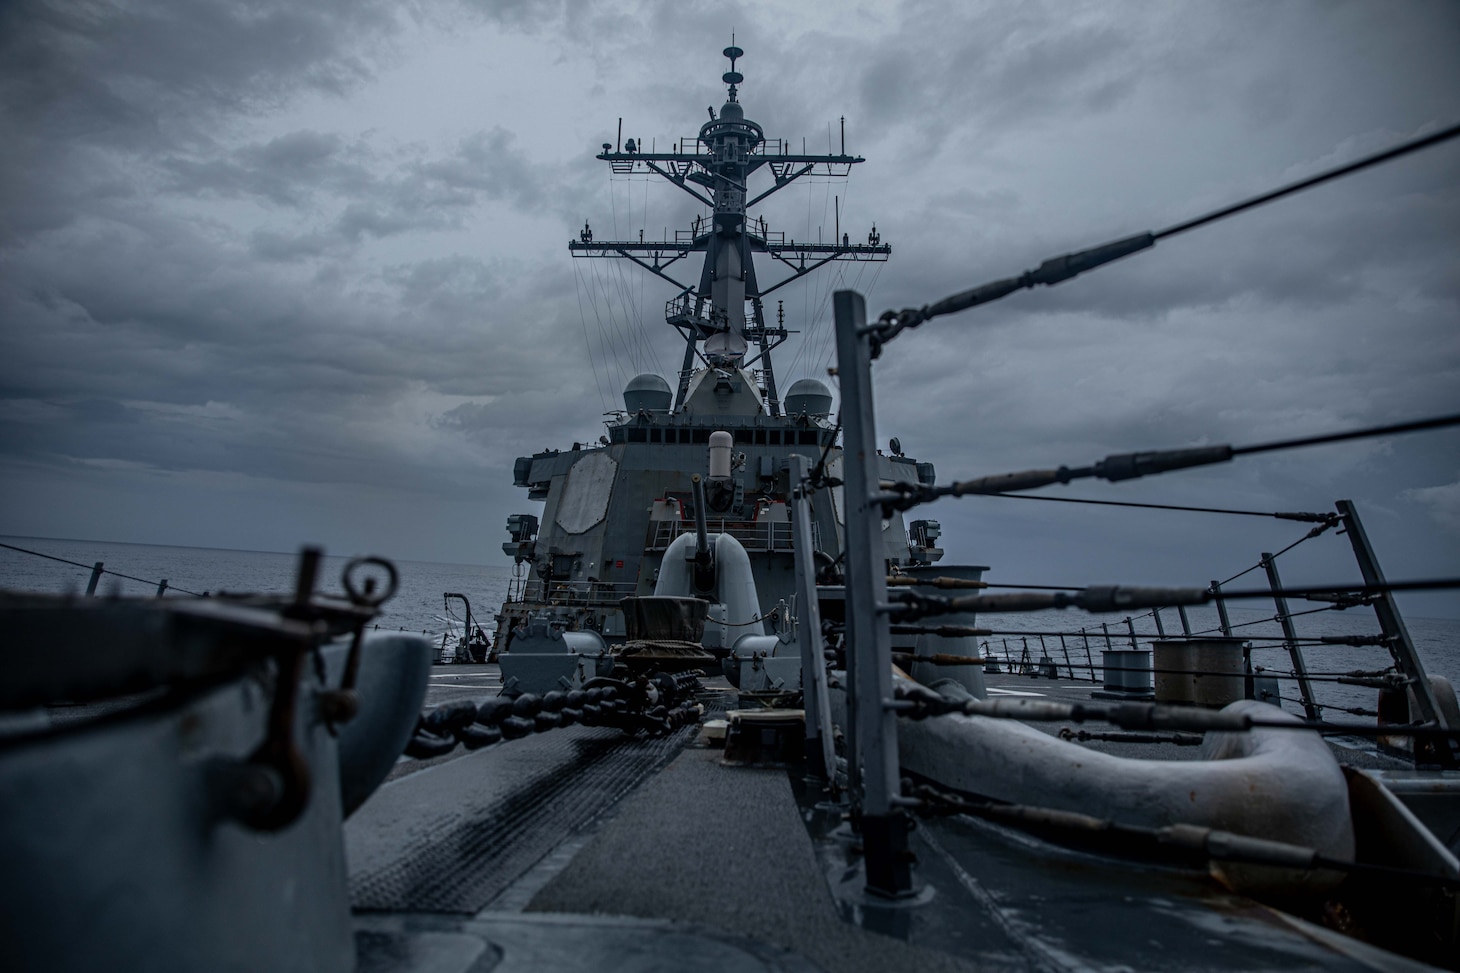 SOUTH CHINA SEA (June 22, 2021) – The Arleigh Burke-class guided-missile destroyer USS Curtis Wilbur (DDG 54) conducts routine operations. Curtis Wilbur is assigned to Commander, Task Force 71/Destroyer Squadron (DESRON) 15, the Navy’s largest forward-deployed DESRON and U.S. 7th Fleet’s principal surface force.